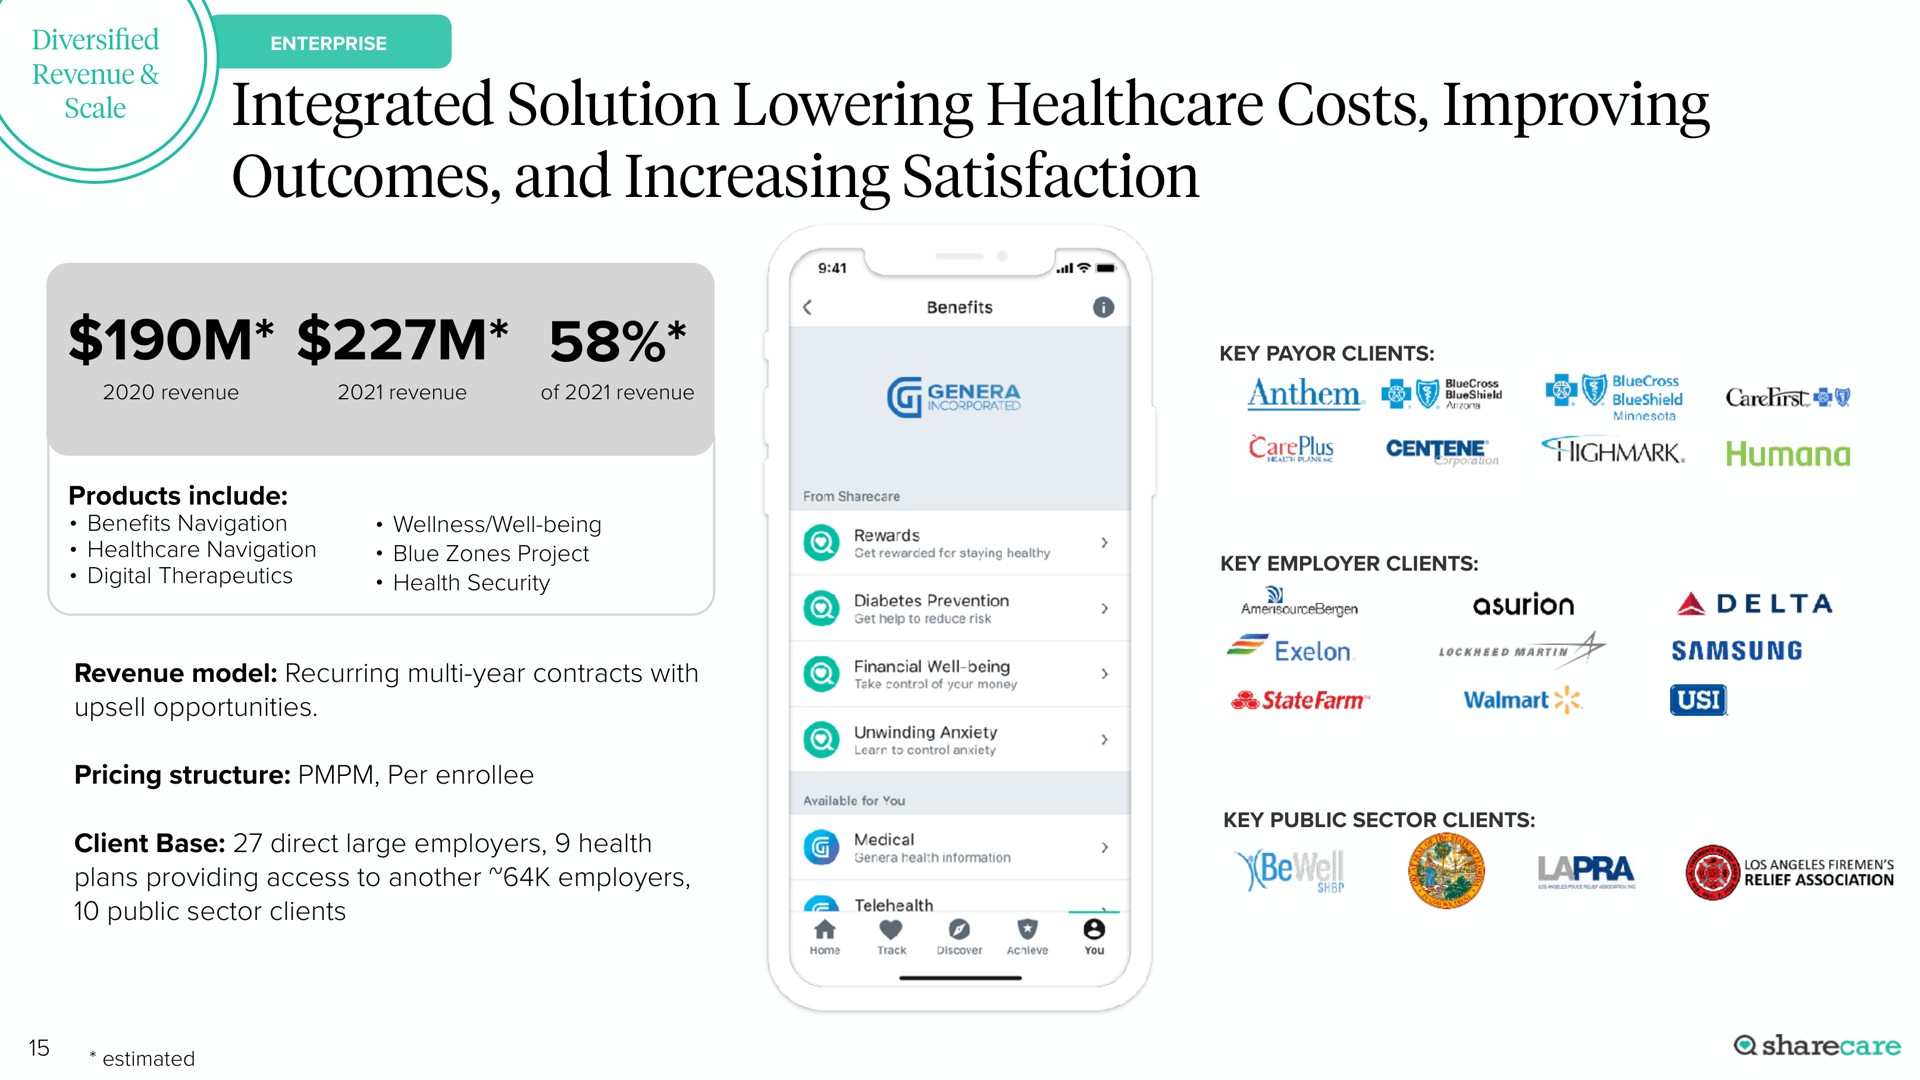 integrated solution lowering costs improving outcomes and increasing satisfaction | Sharecare